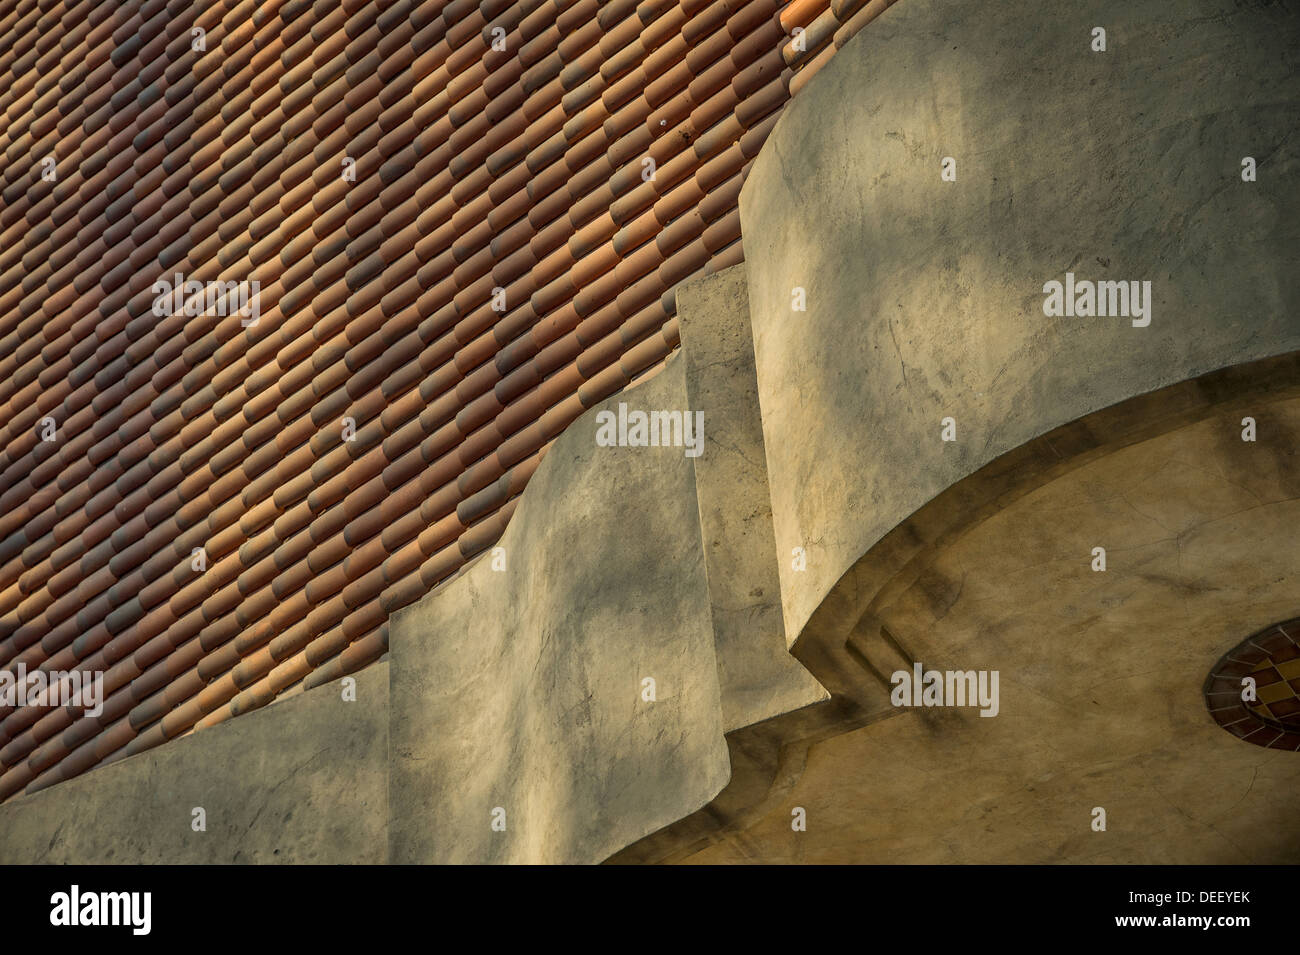 Southwestern Style Architecture Roof Detail Stock Photo